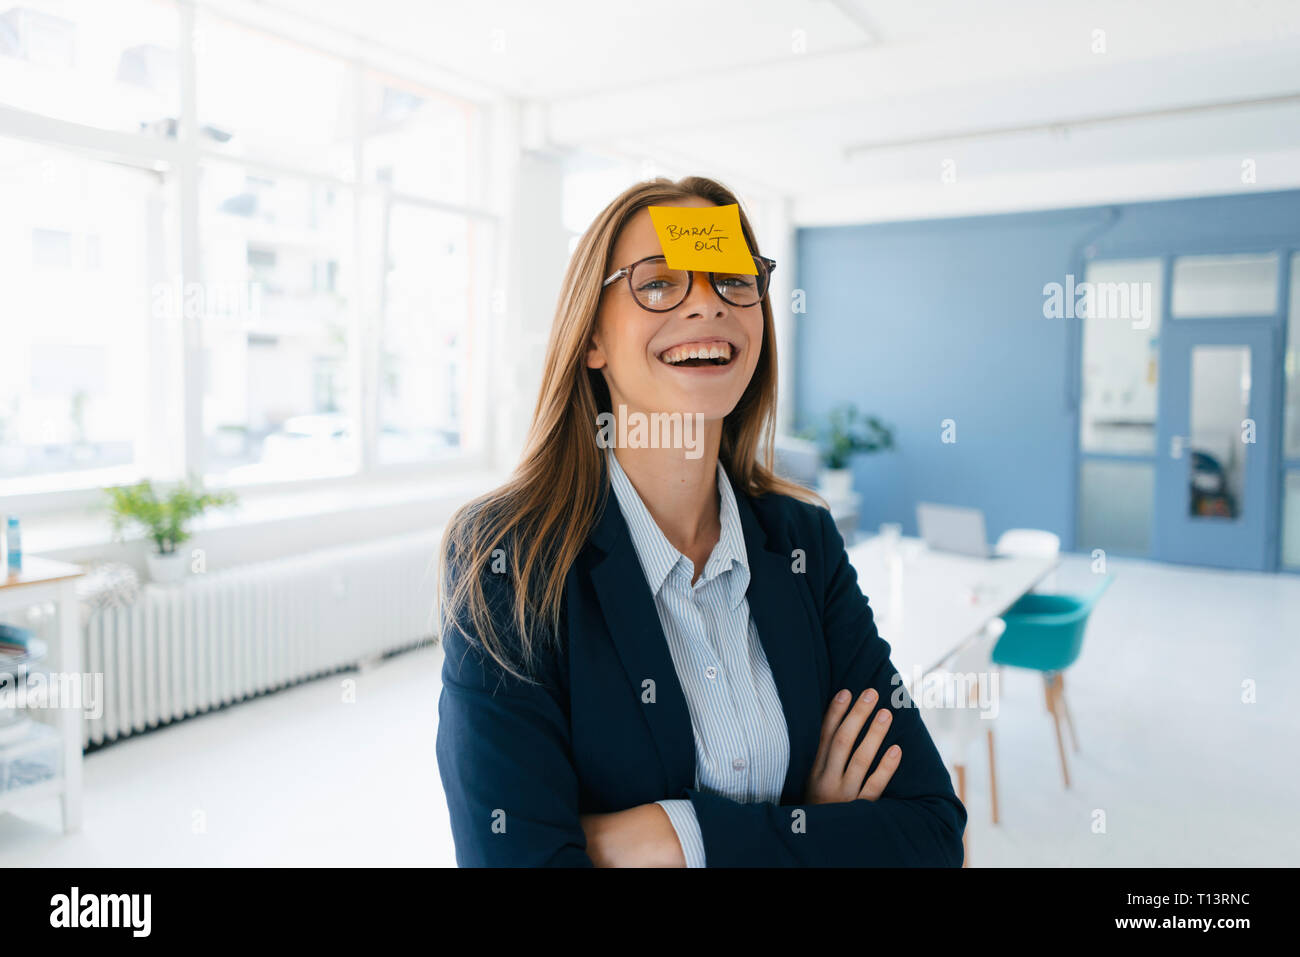 Young businesswman with yellow sticky note on her forehead, saying 'burnout' Stock Photo